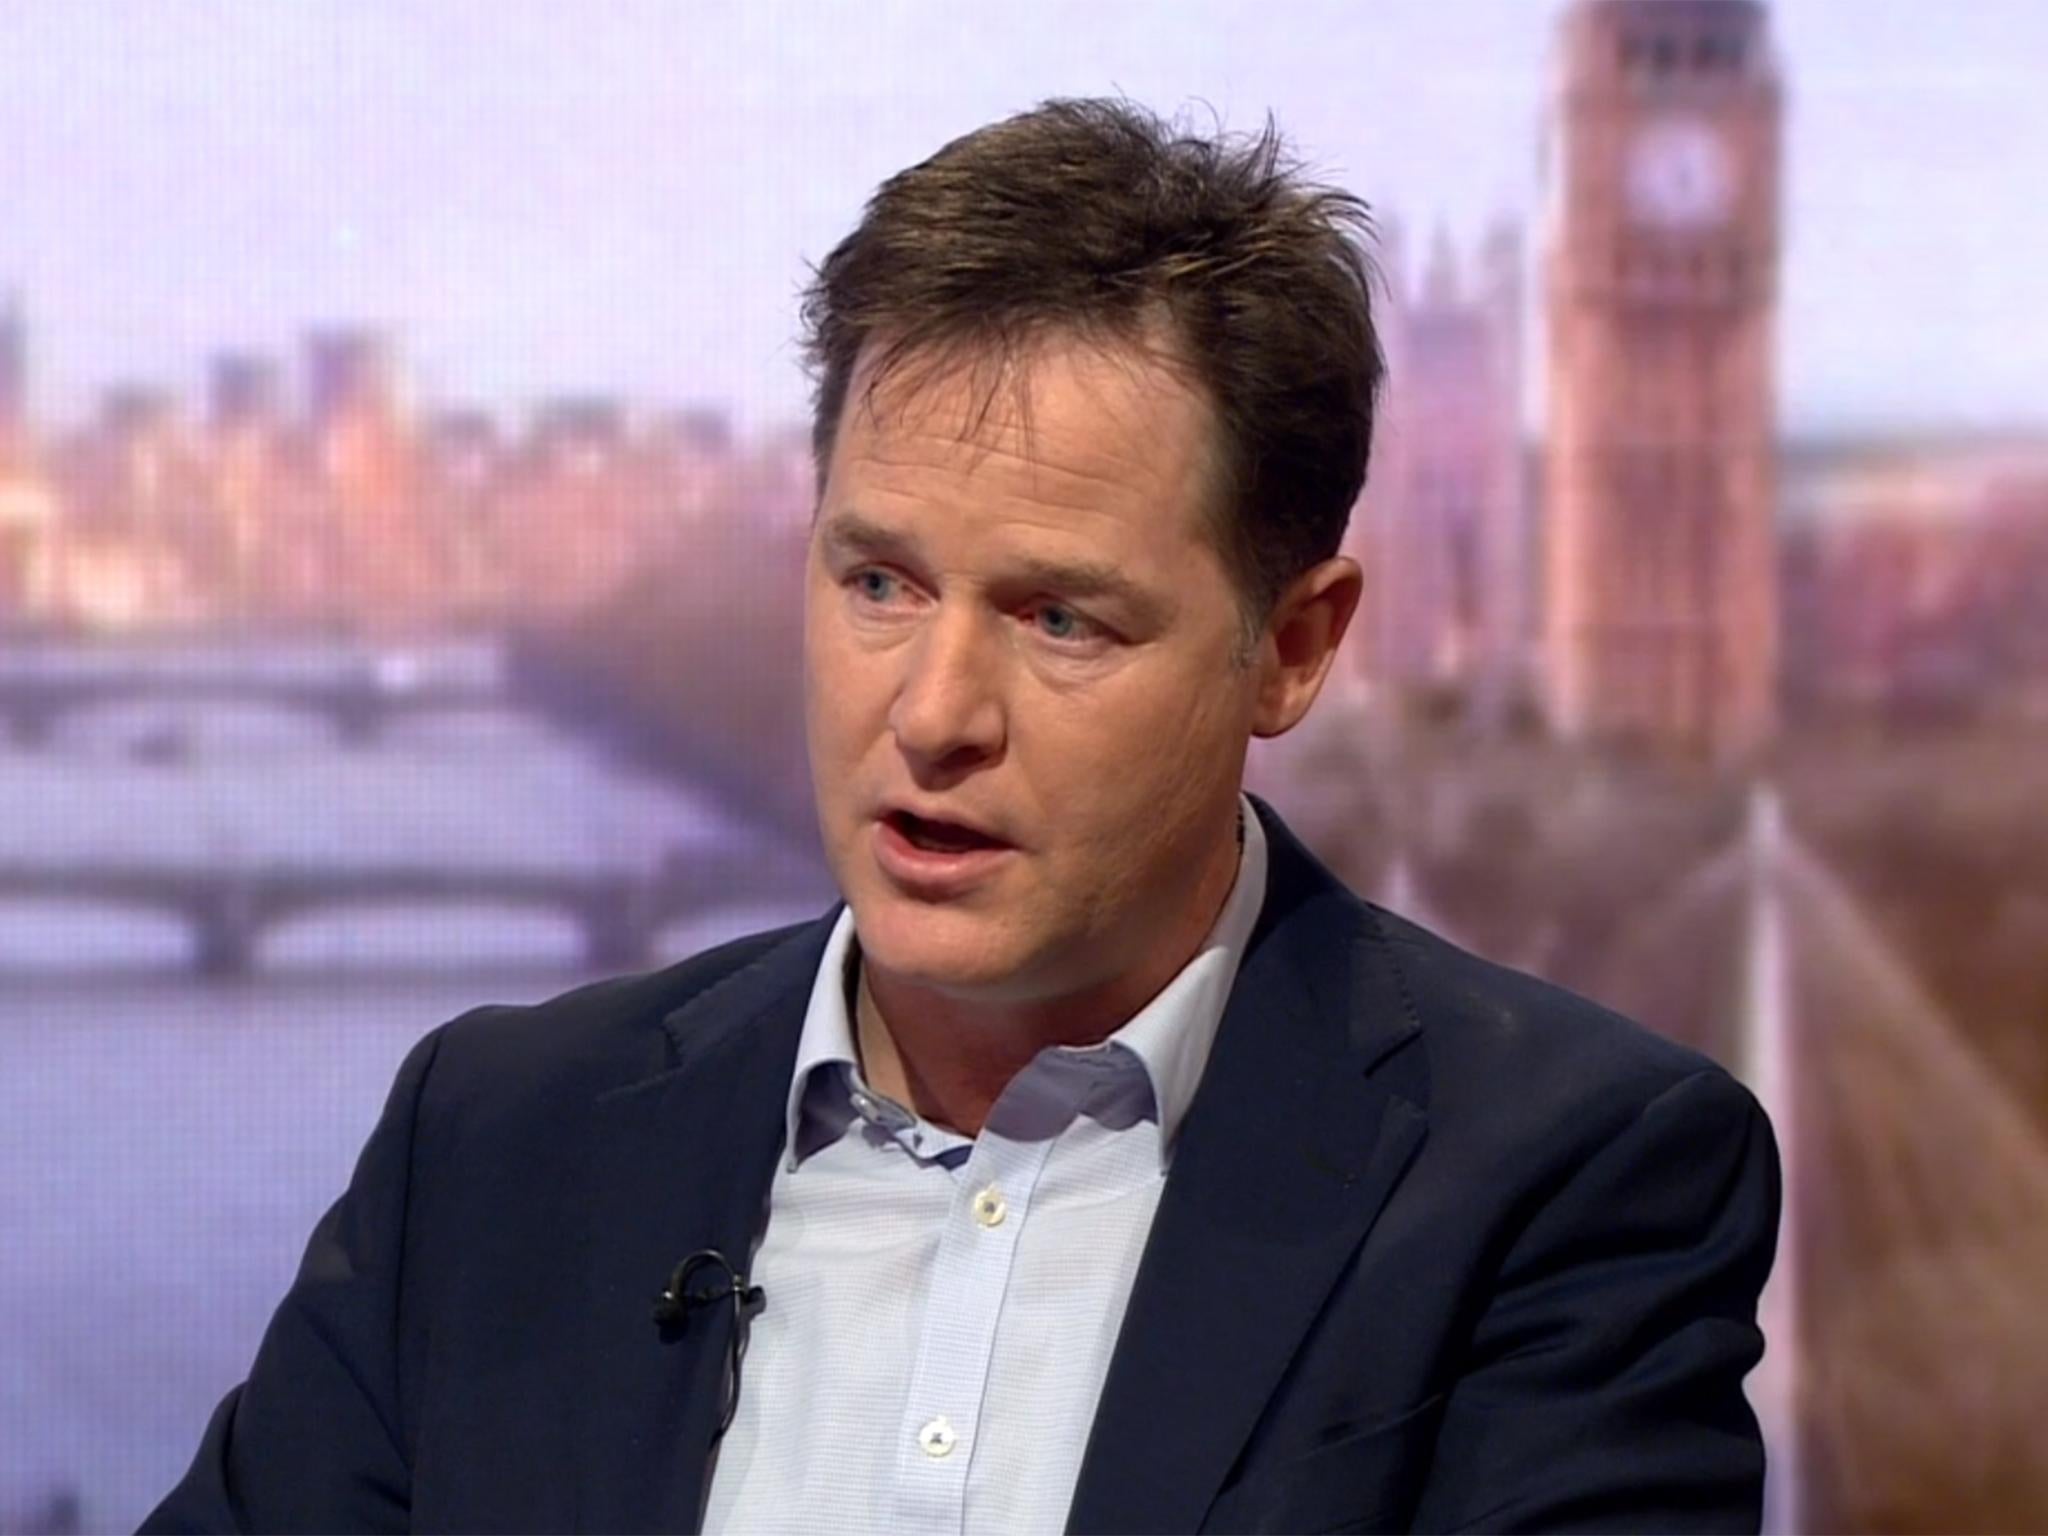 'How I envy the certainties of those who vilify Nick Clegg, whose world is clearly binary: us and them, goodies and baddies, left and right.'